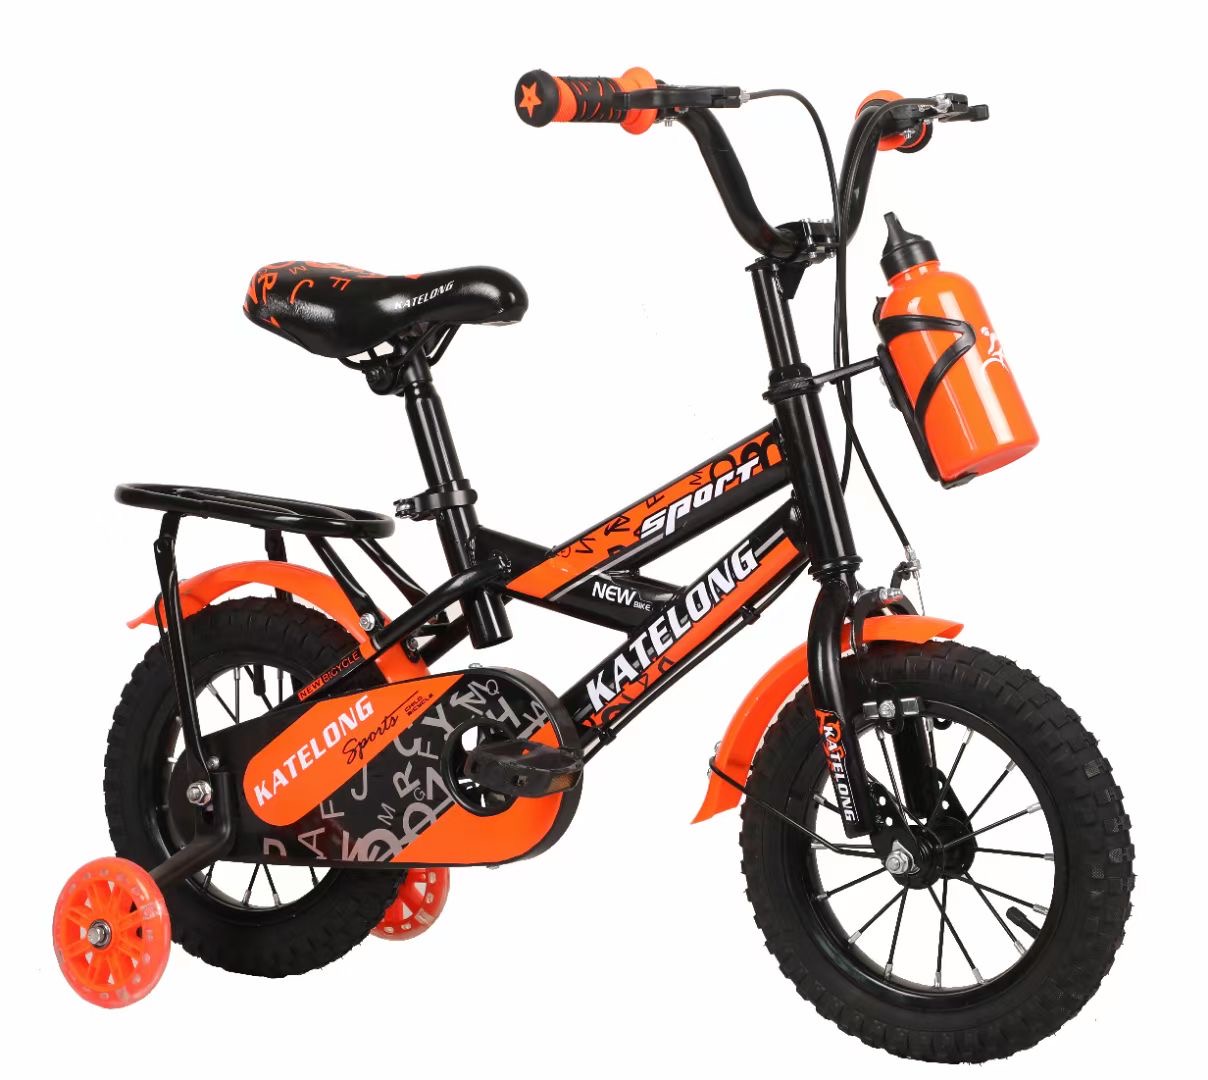 kids bicycles for 6 years / High grade factory 12 inch boys’ bicycles kid bike for boys cycle/3 8 years old kids bike